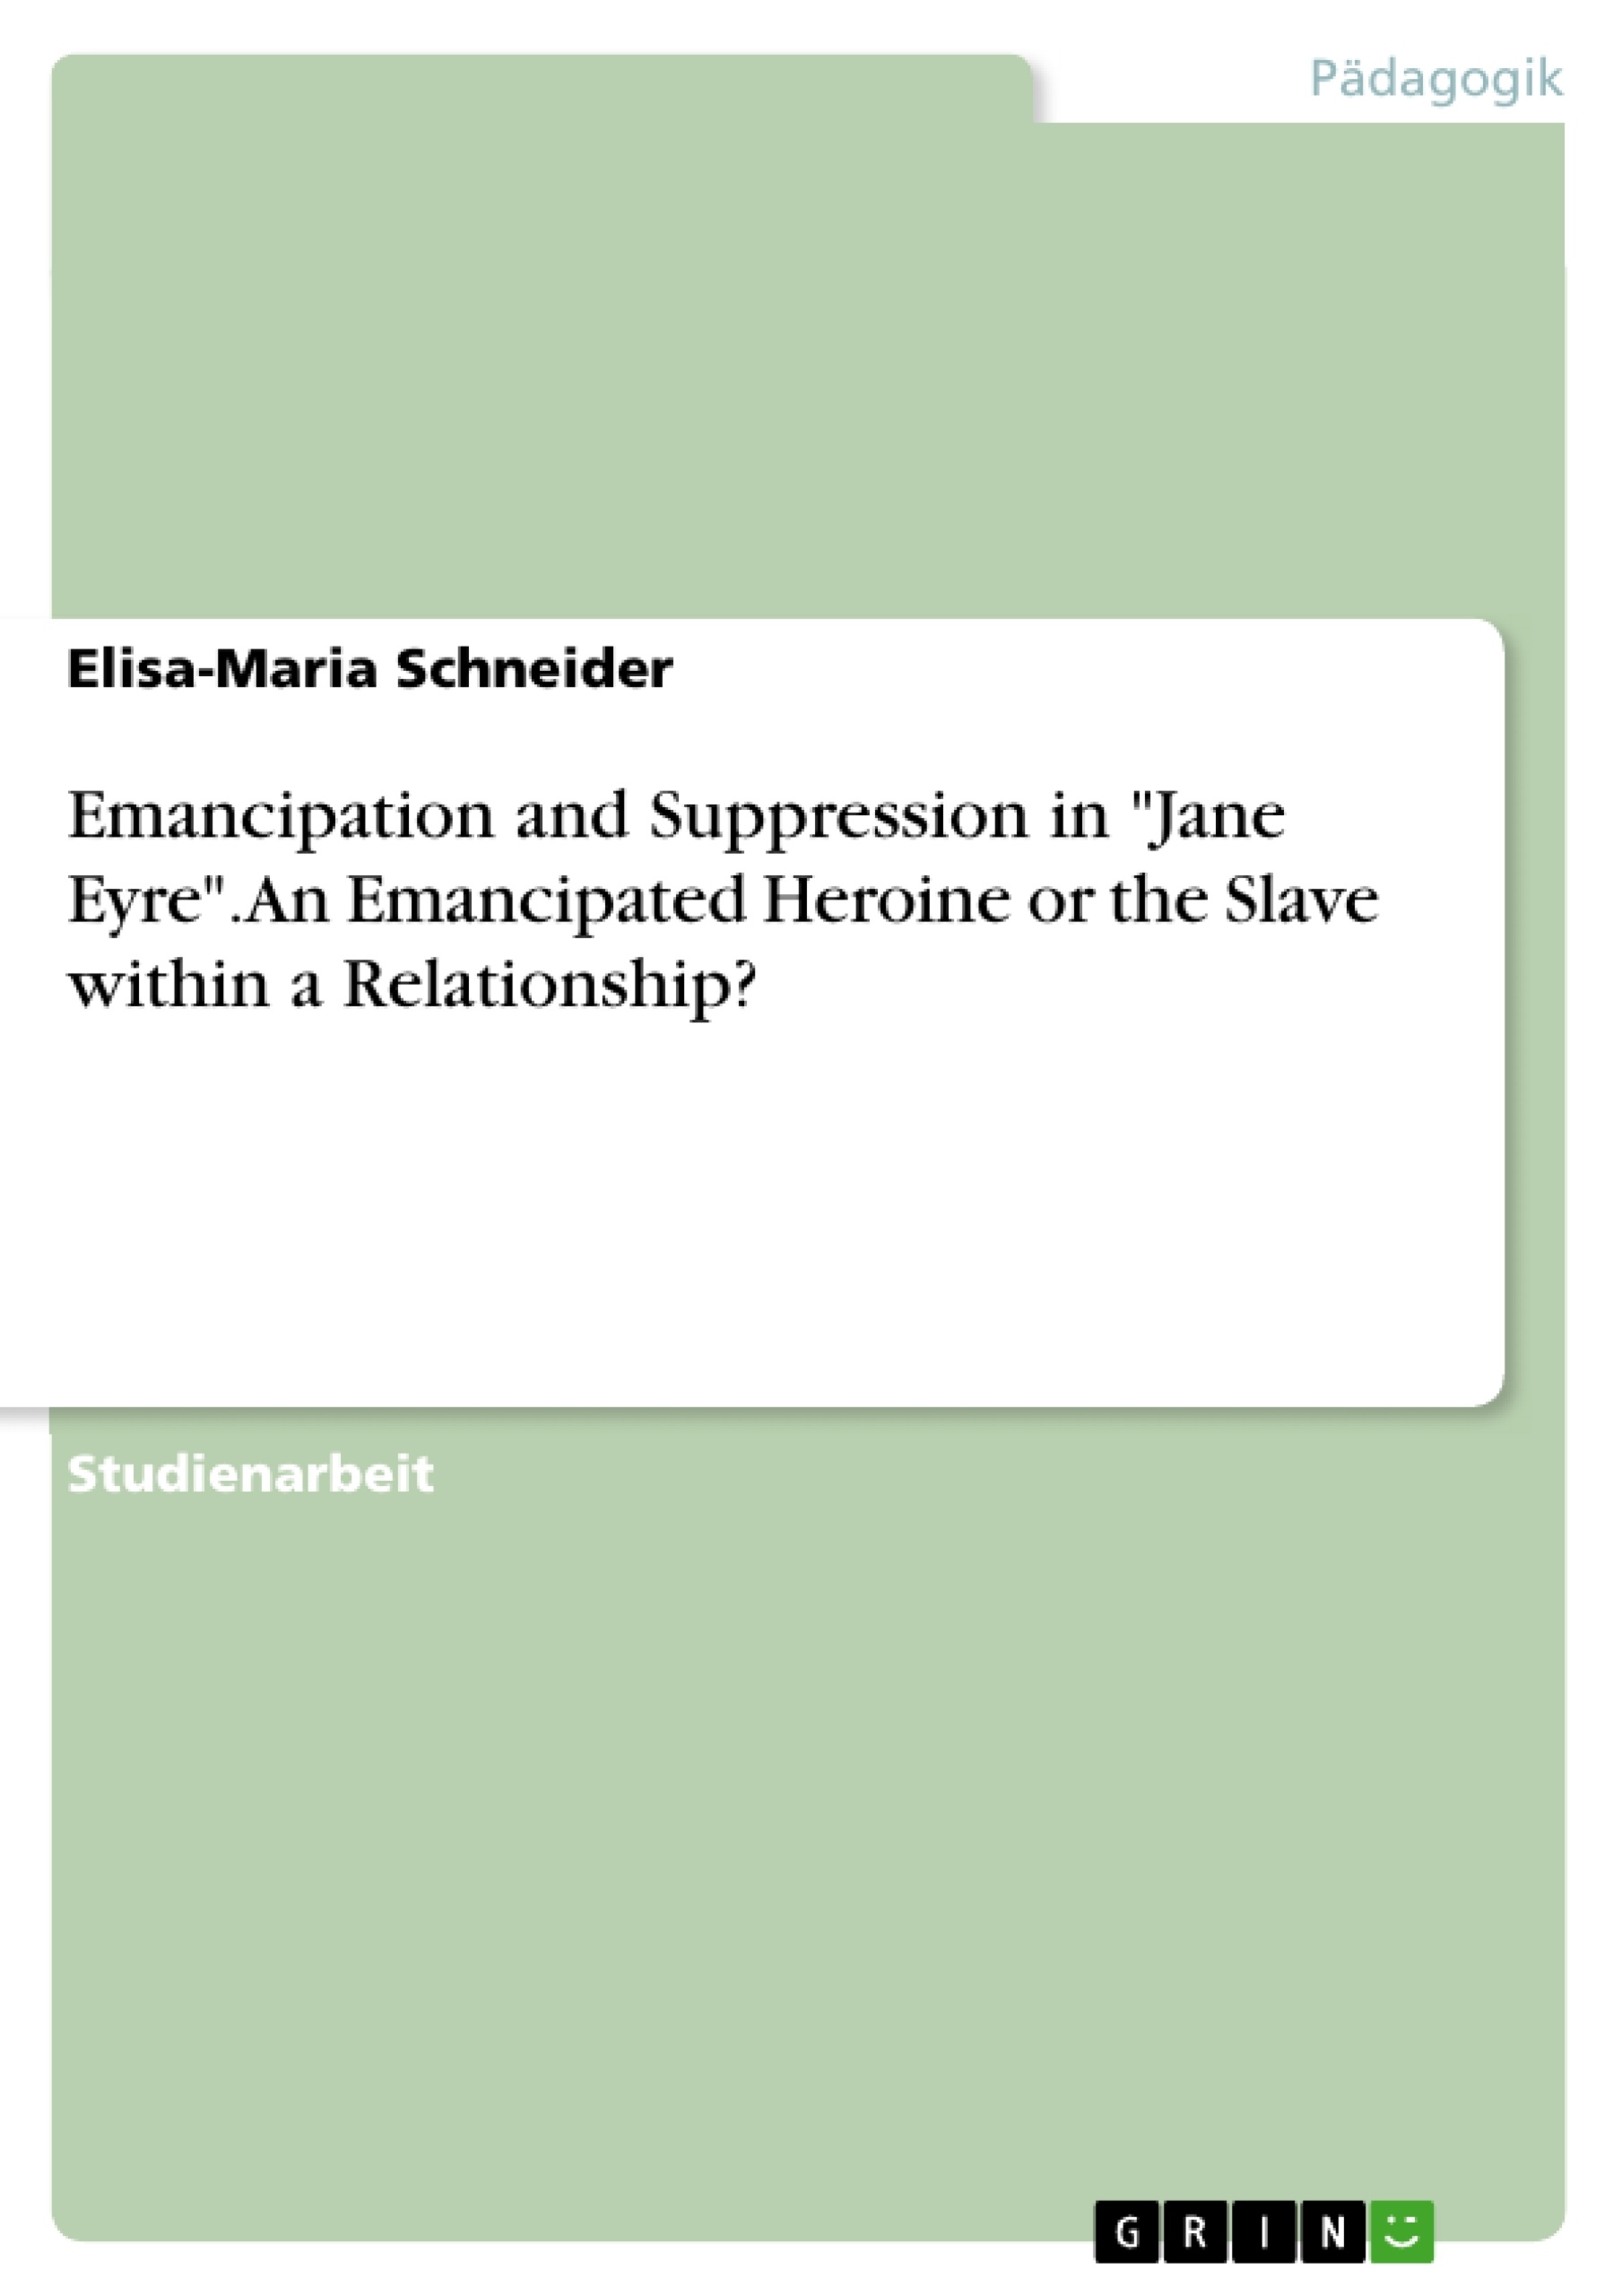 Titre: Emancipation and Suppression in "Jane Eyre". An Emancipated Heroine or the Slave within a Relationship?